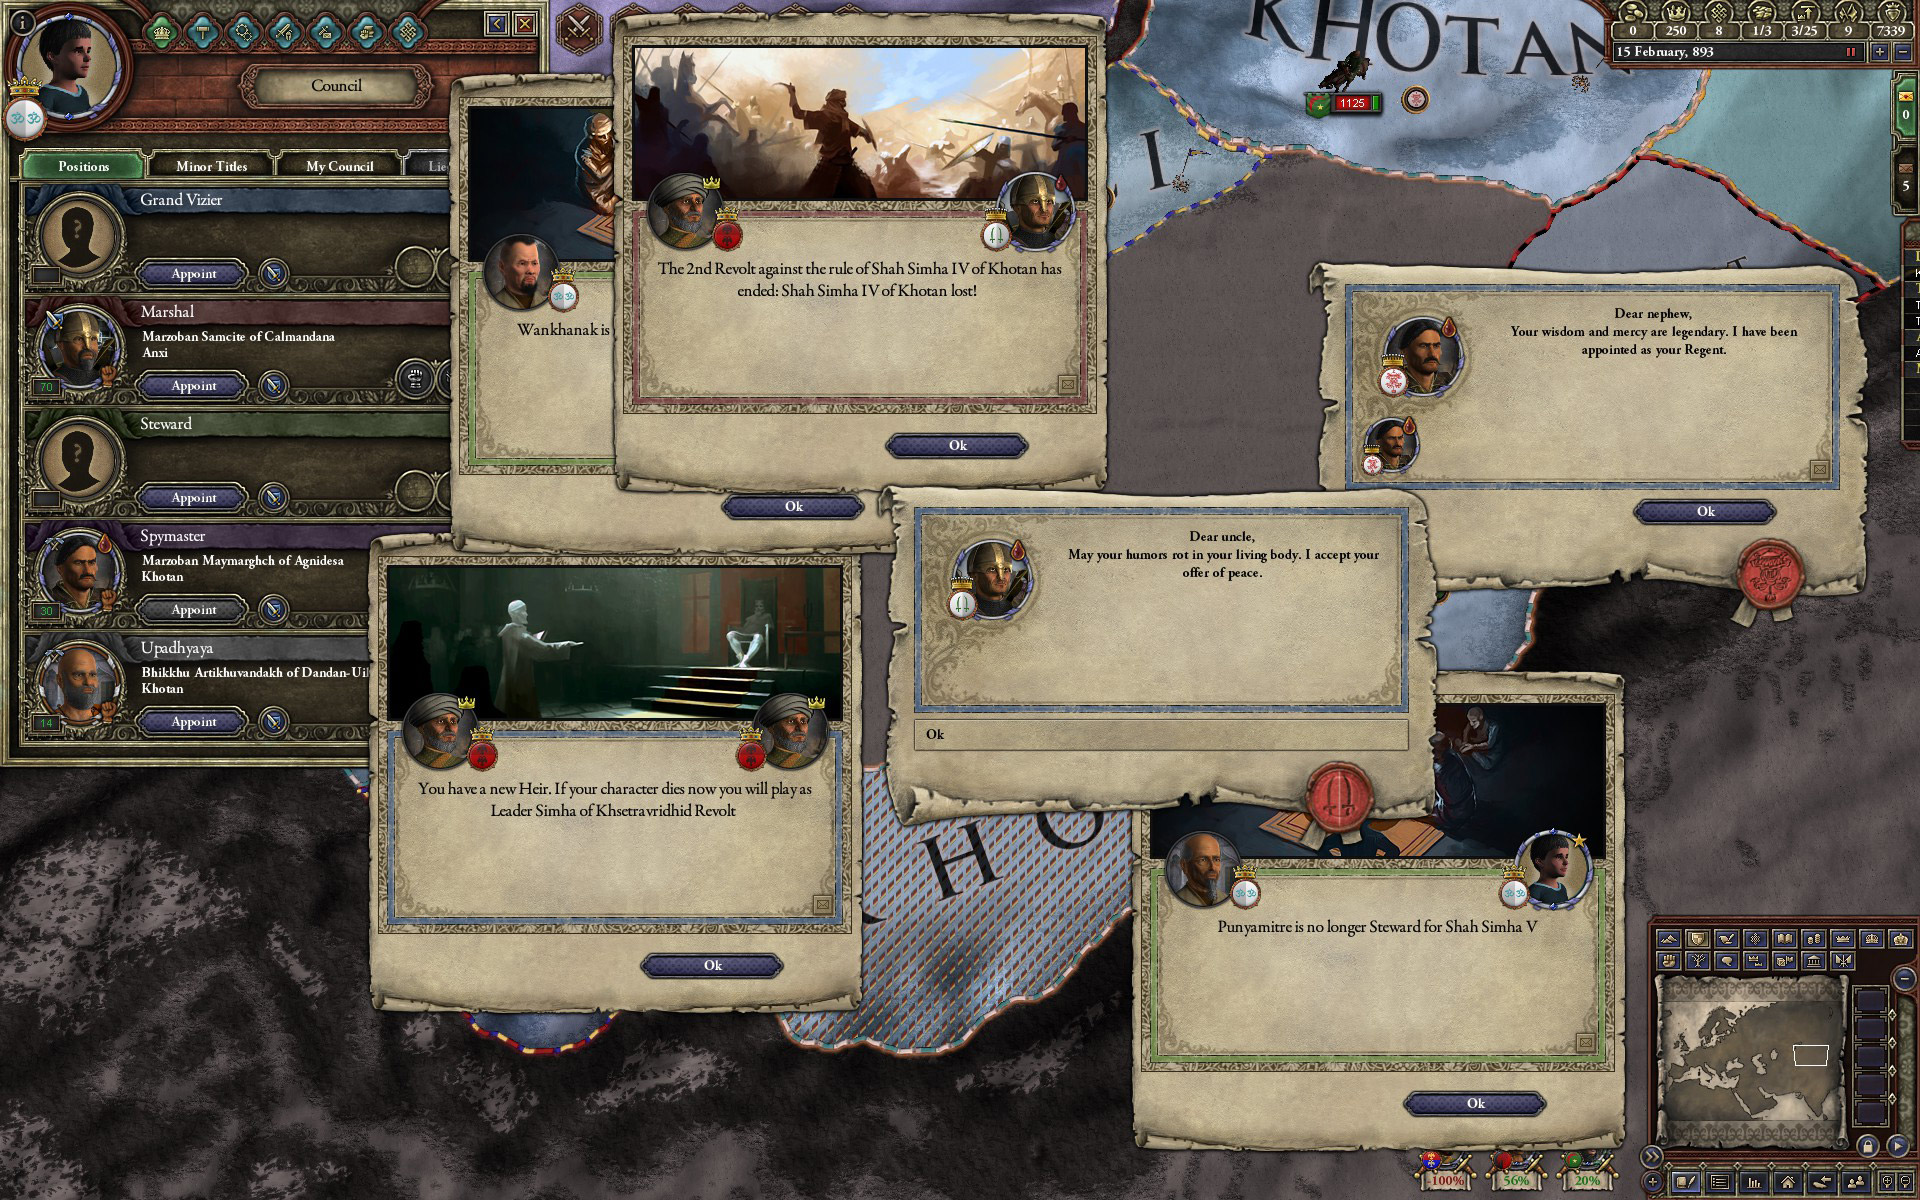 Crusader Kings 2, with a bunch of windows open because my pervious character died and everything immediately went to hell. This is why I love Crusader Kings.